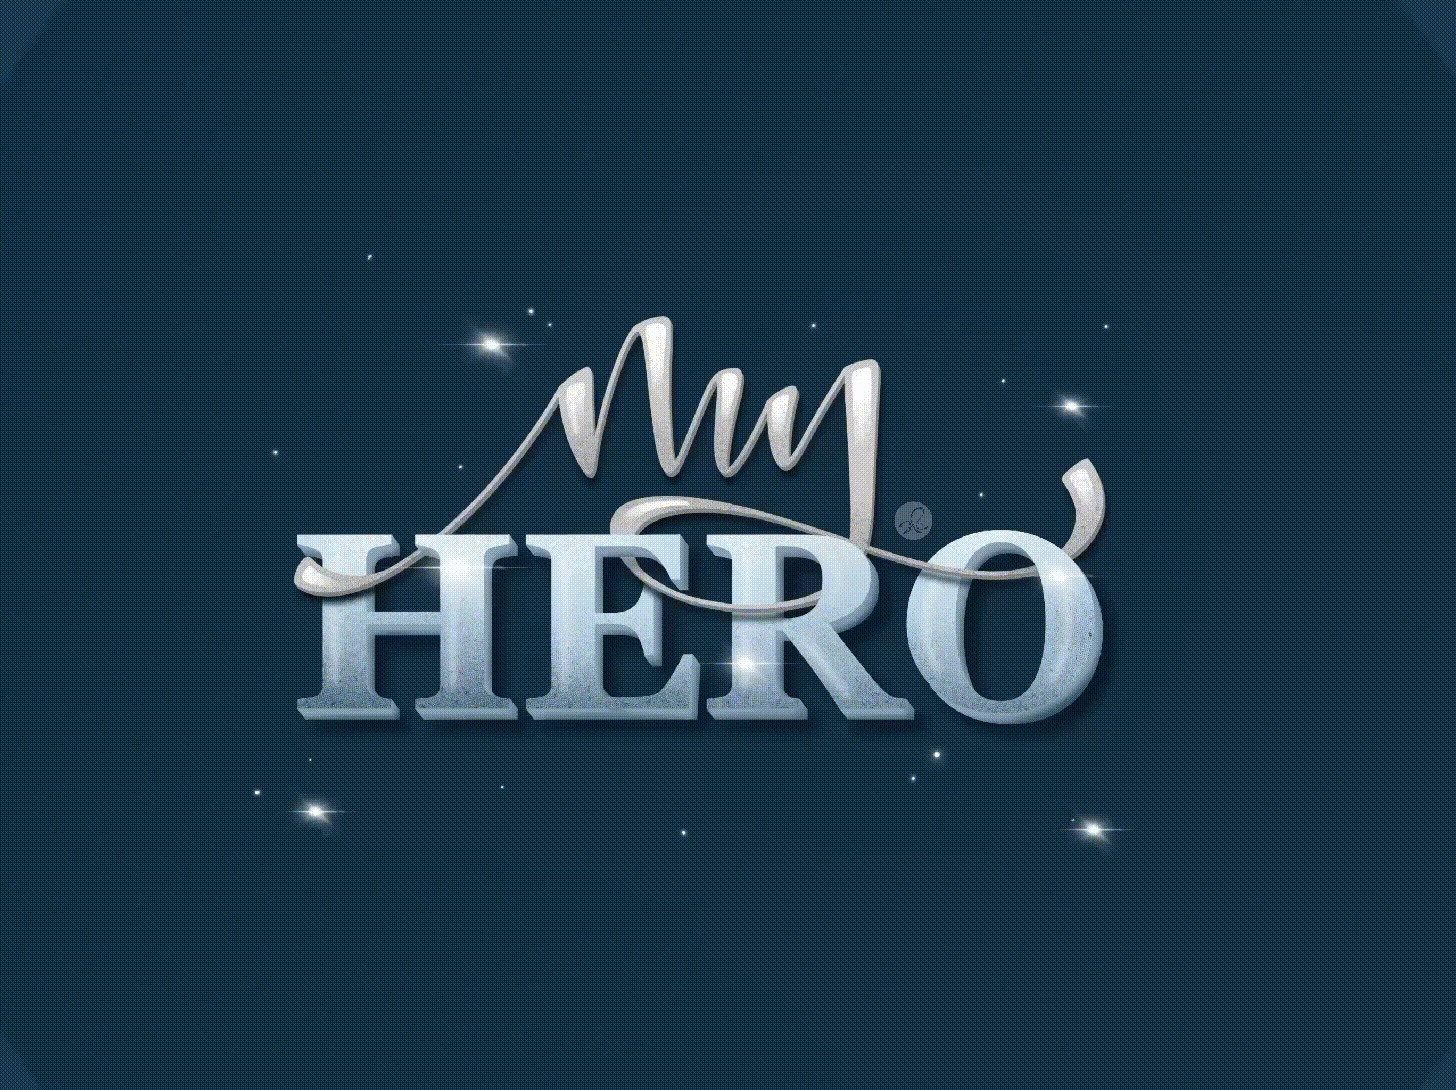 Sketch of custom hand letter design with words "my hero"